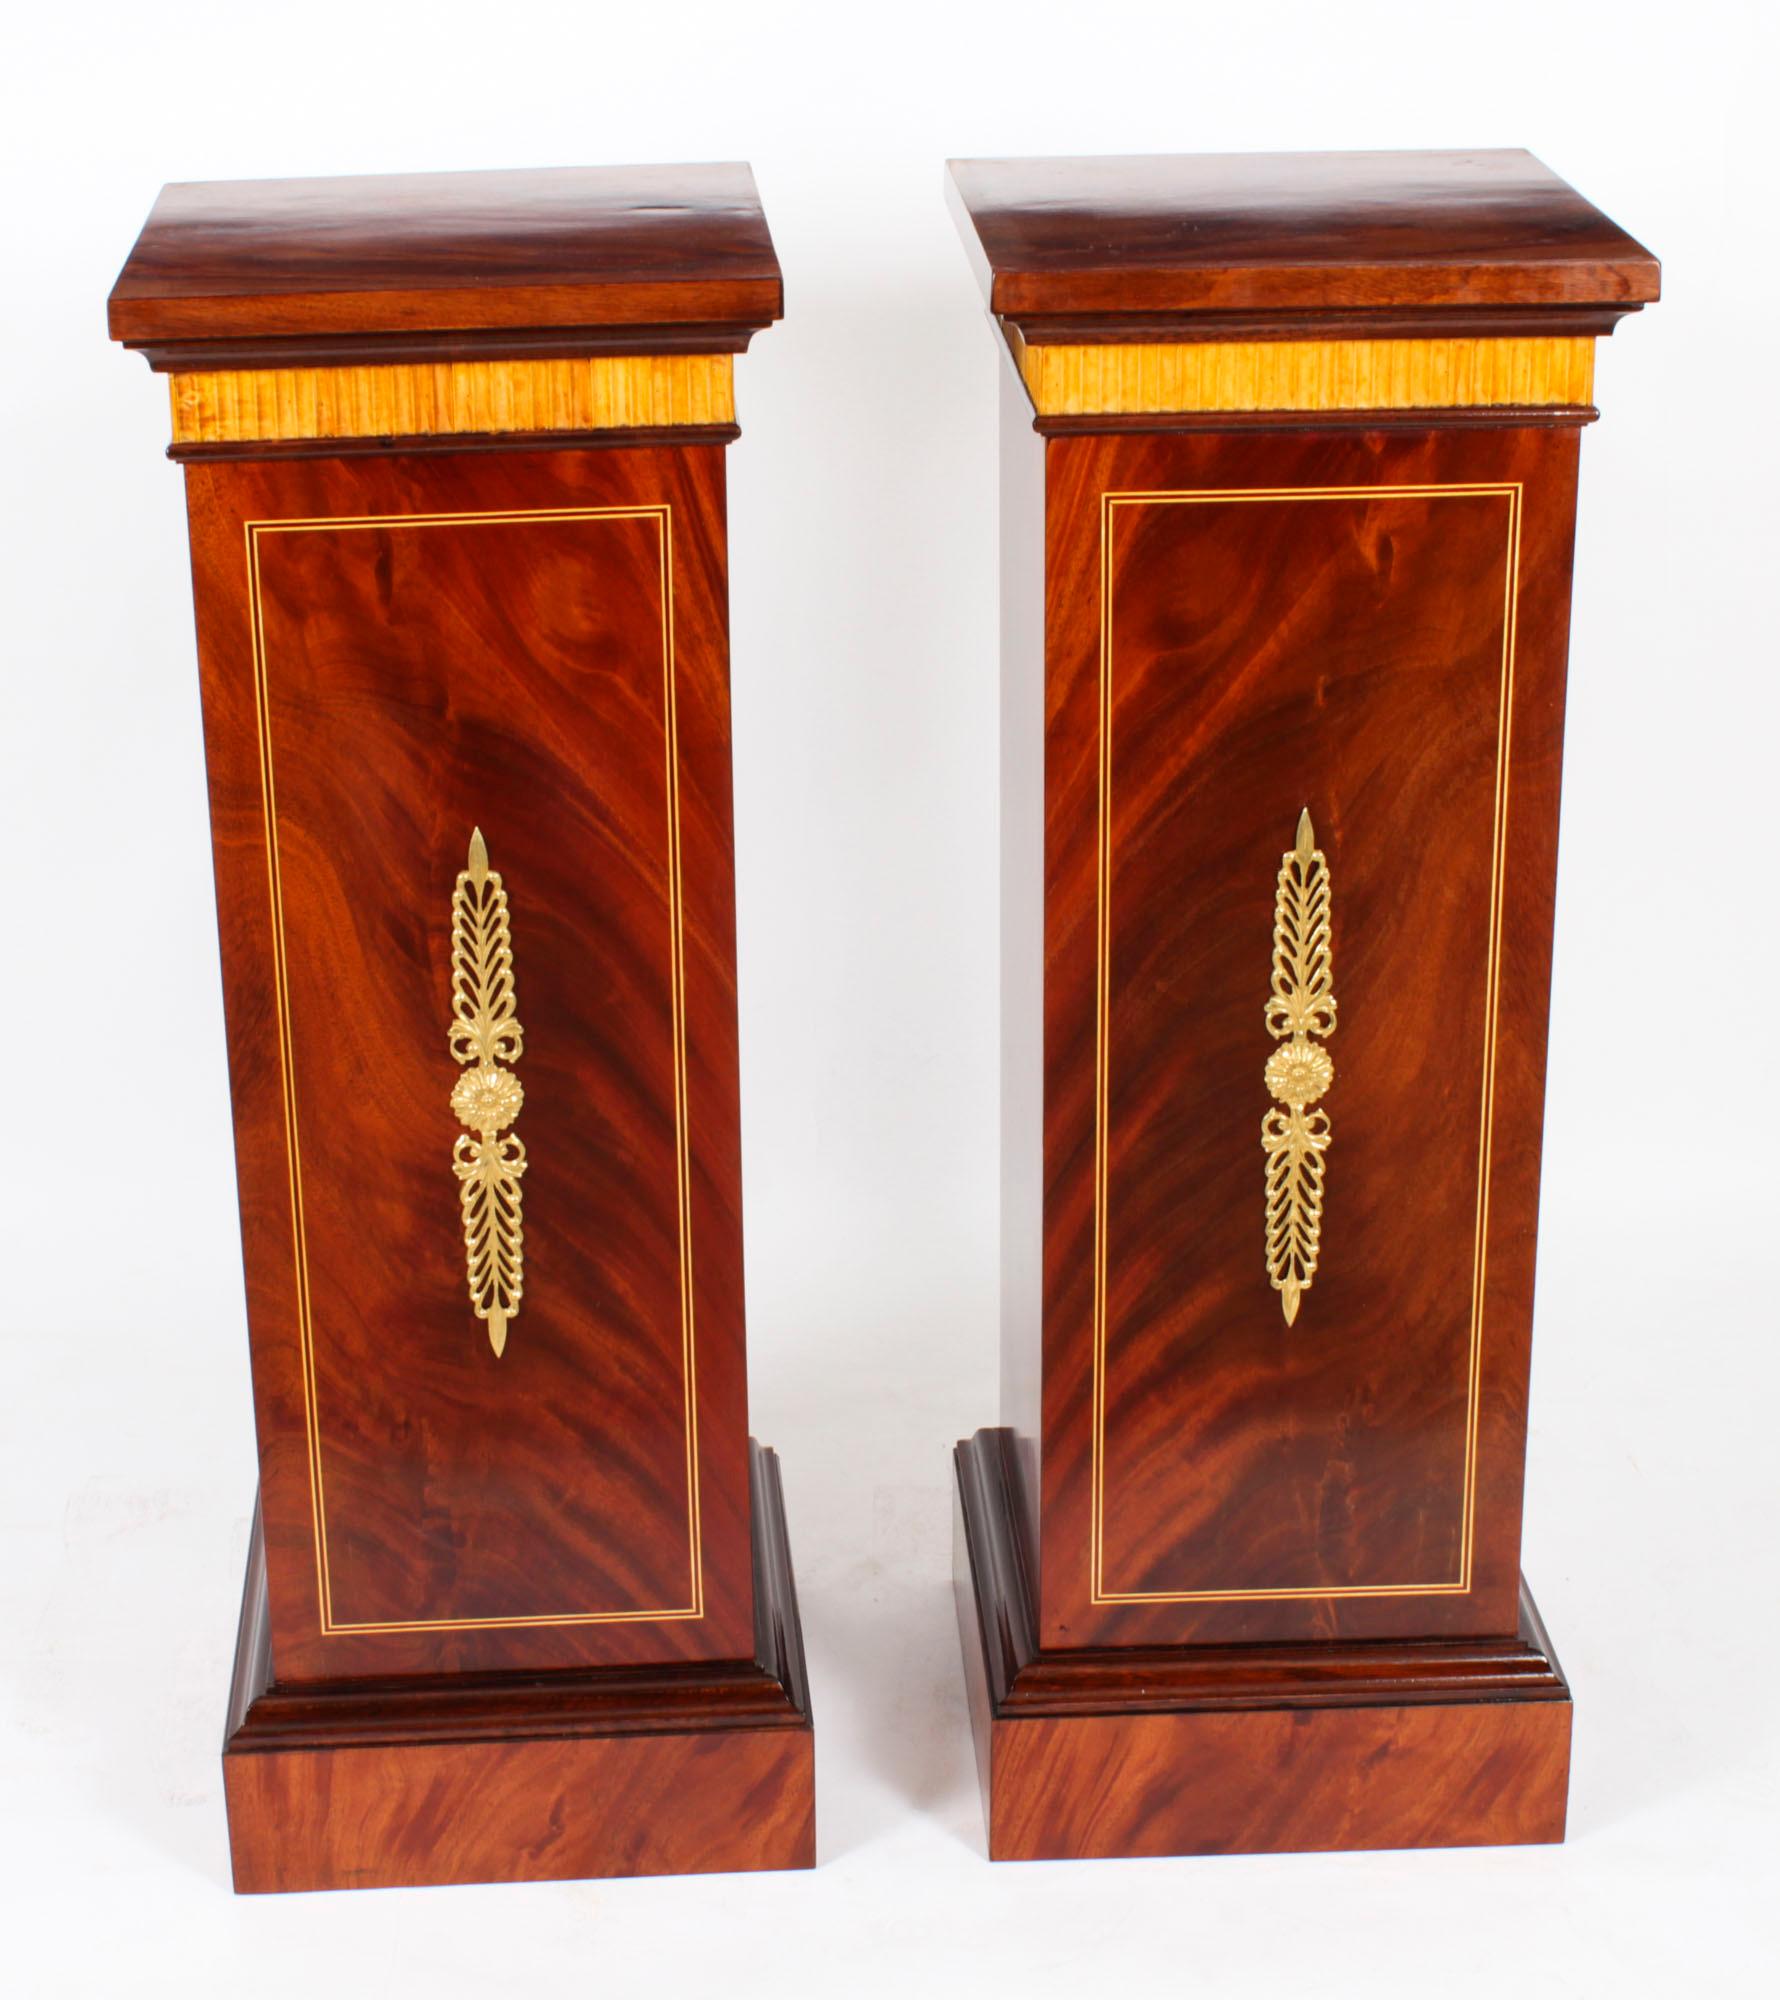 Neoclassical Antique Pair Monumental Ormolu Mounted Malachite Obelisks on Stands, 1920s For Sale